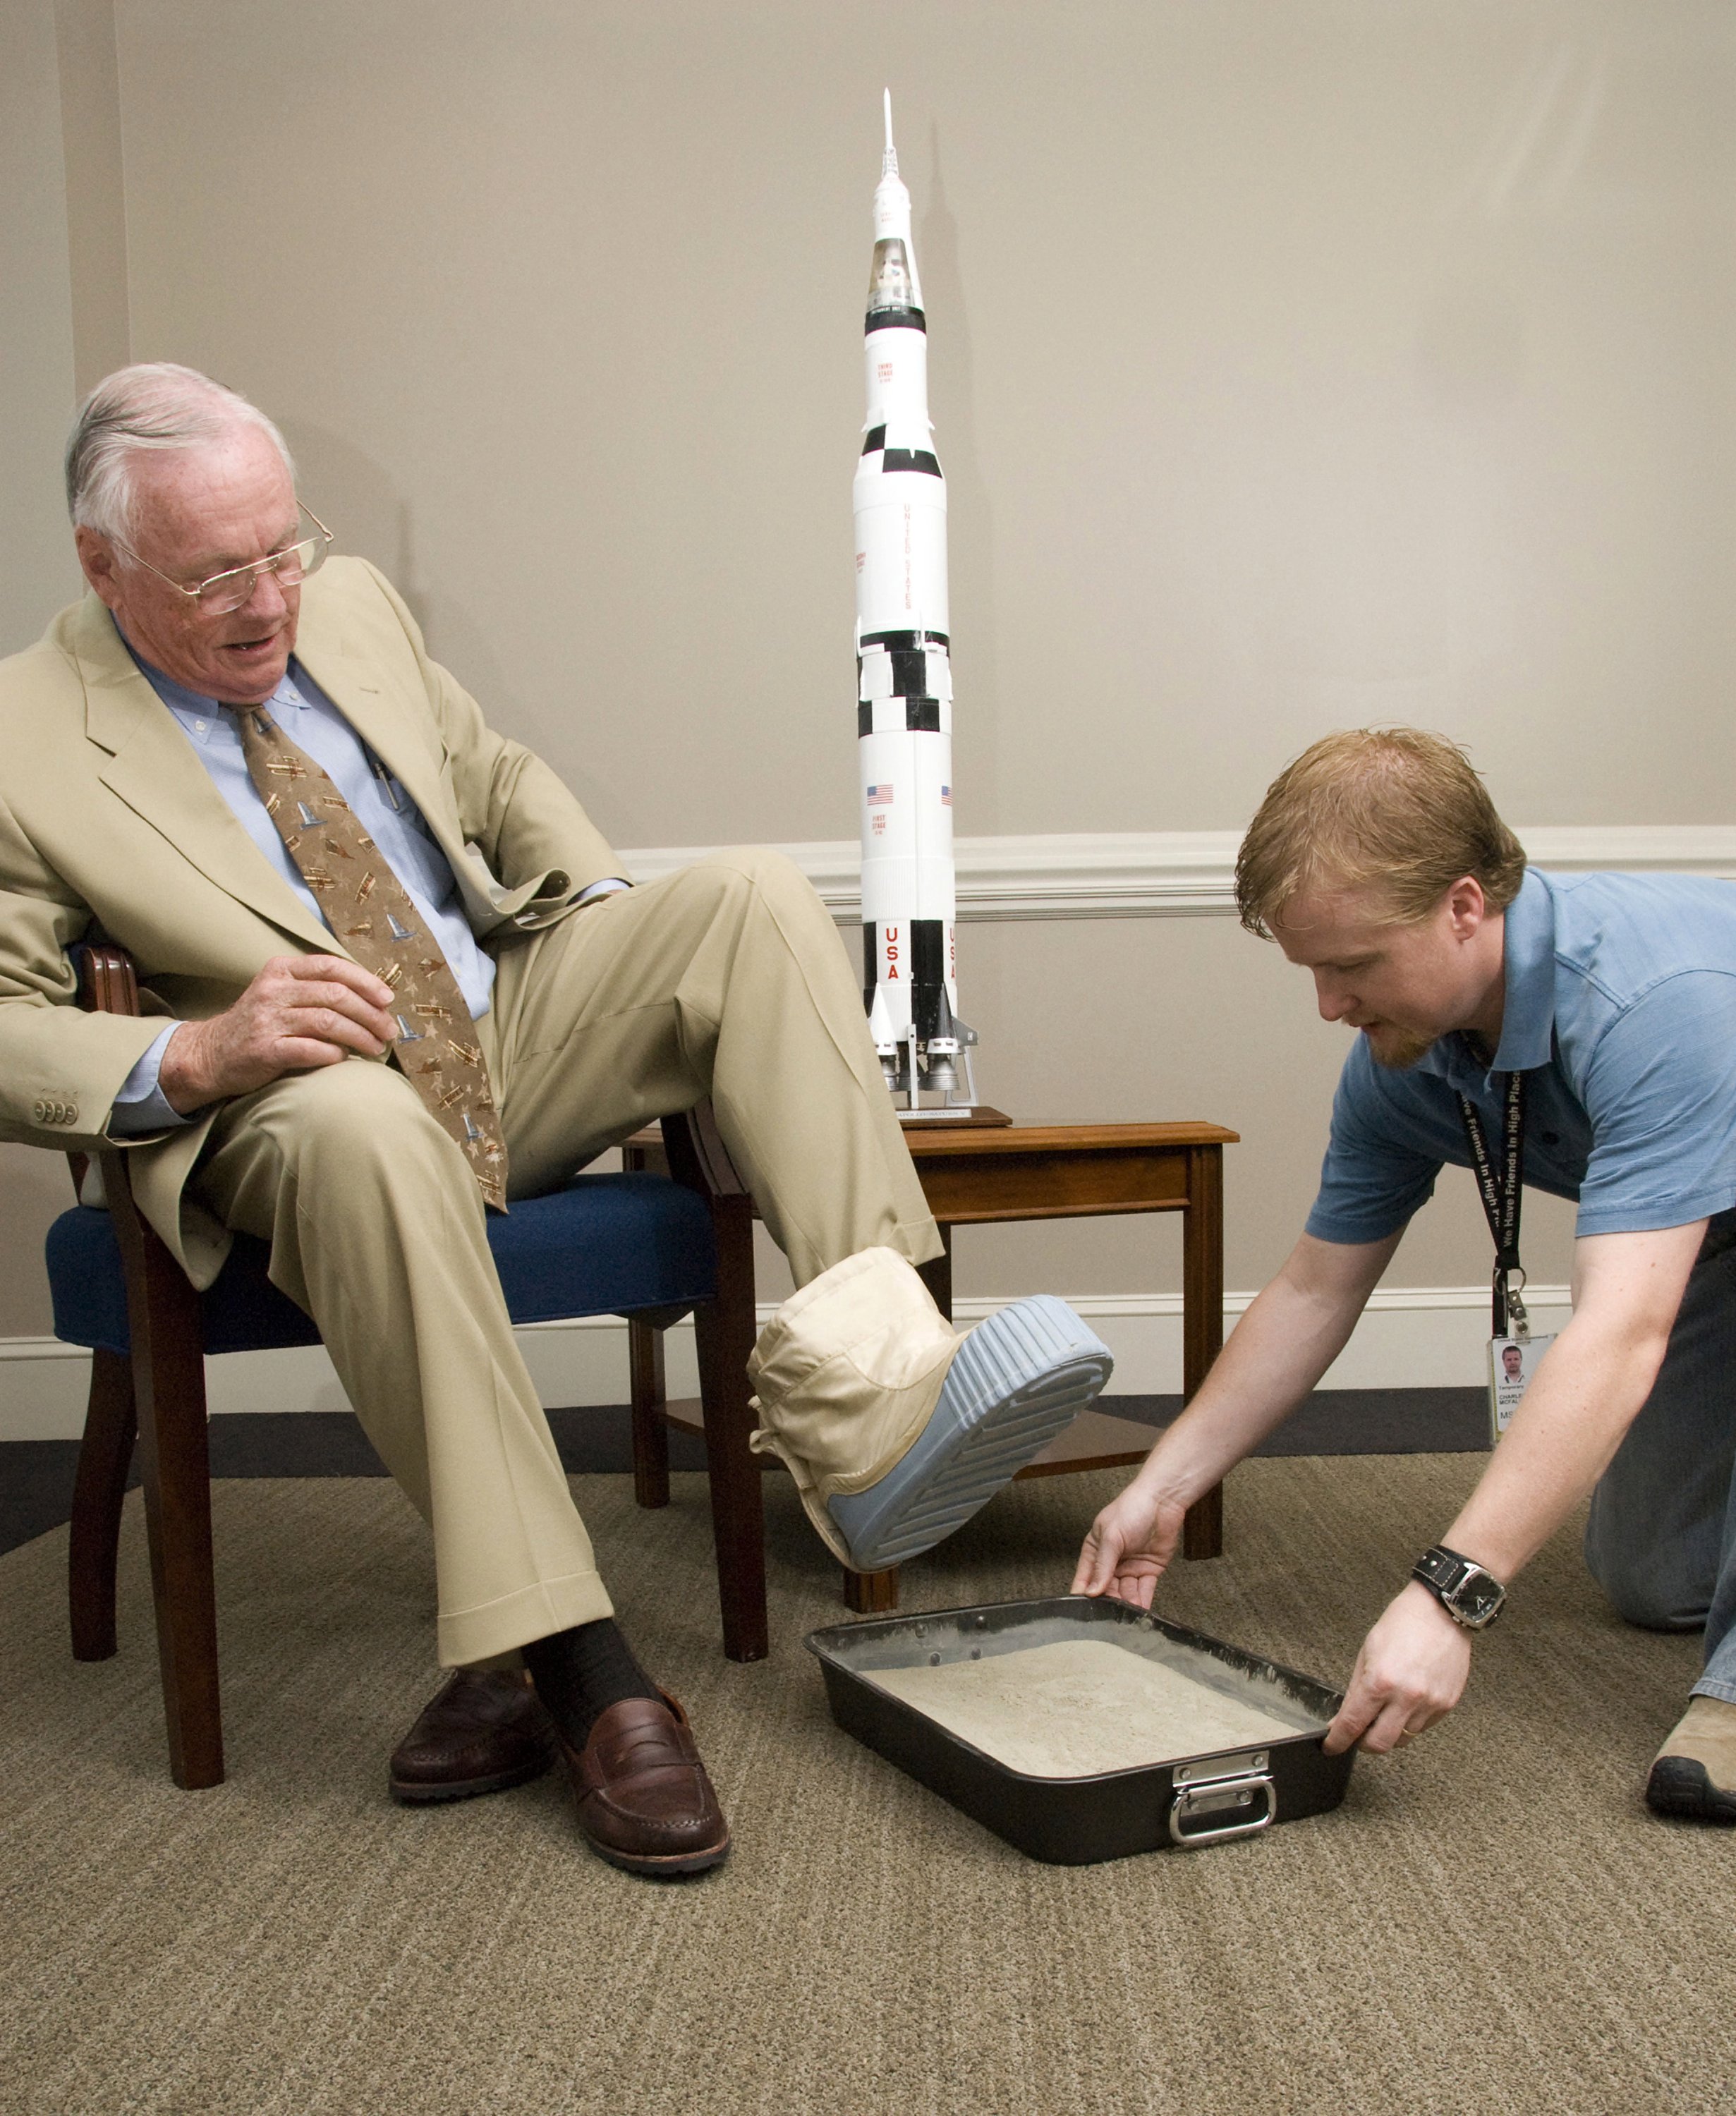 Neil Armstrong casts his footprint